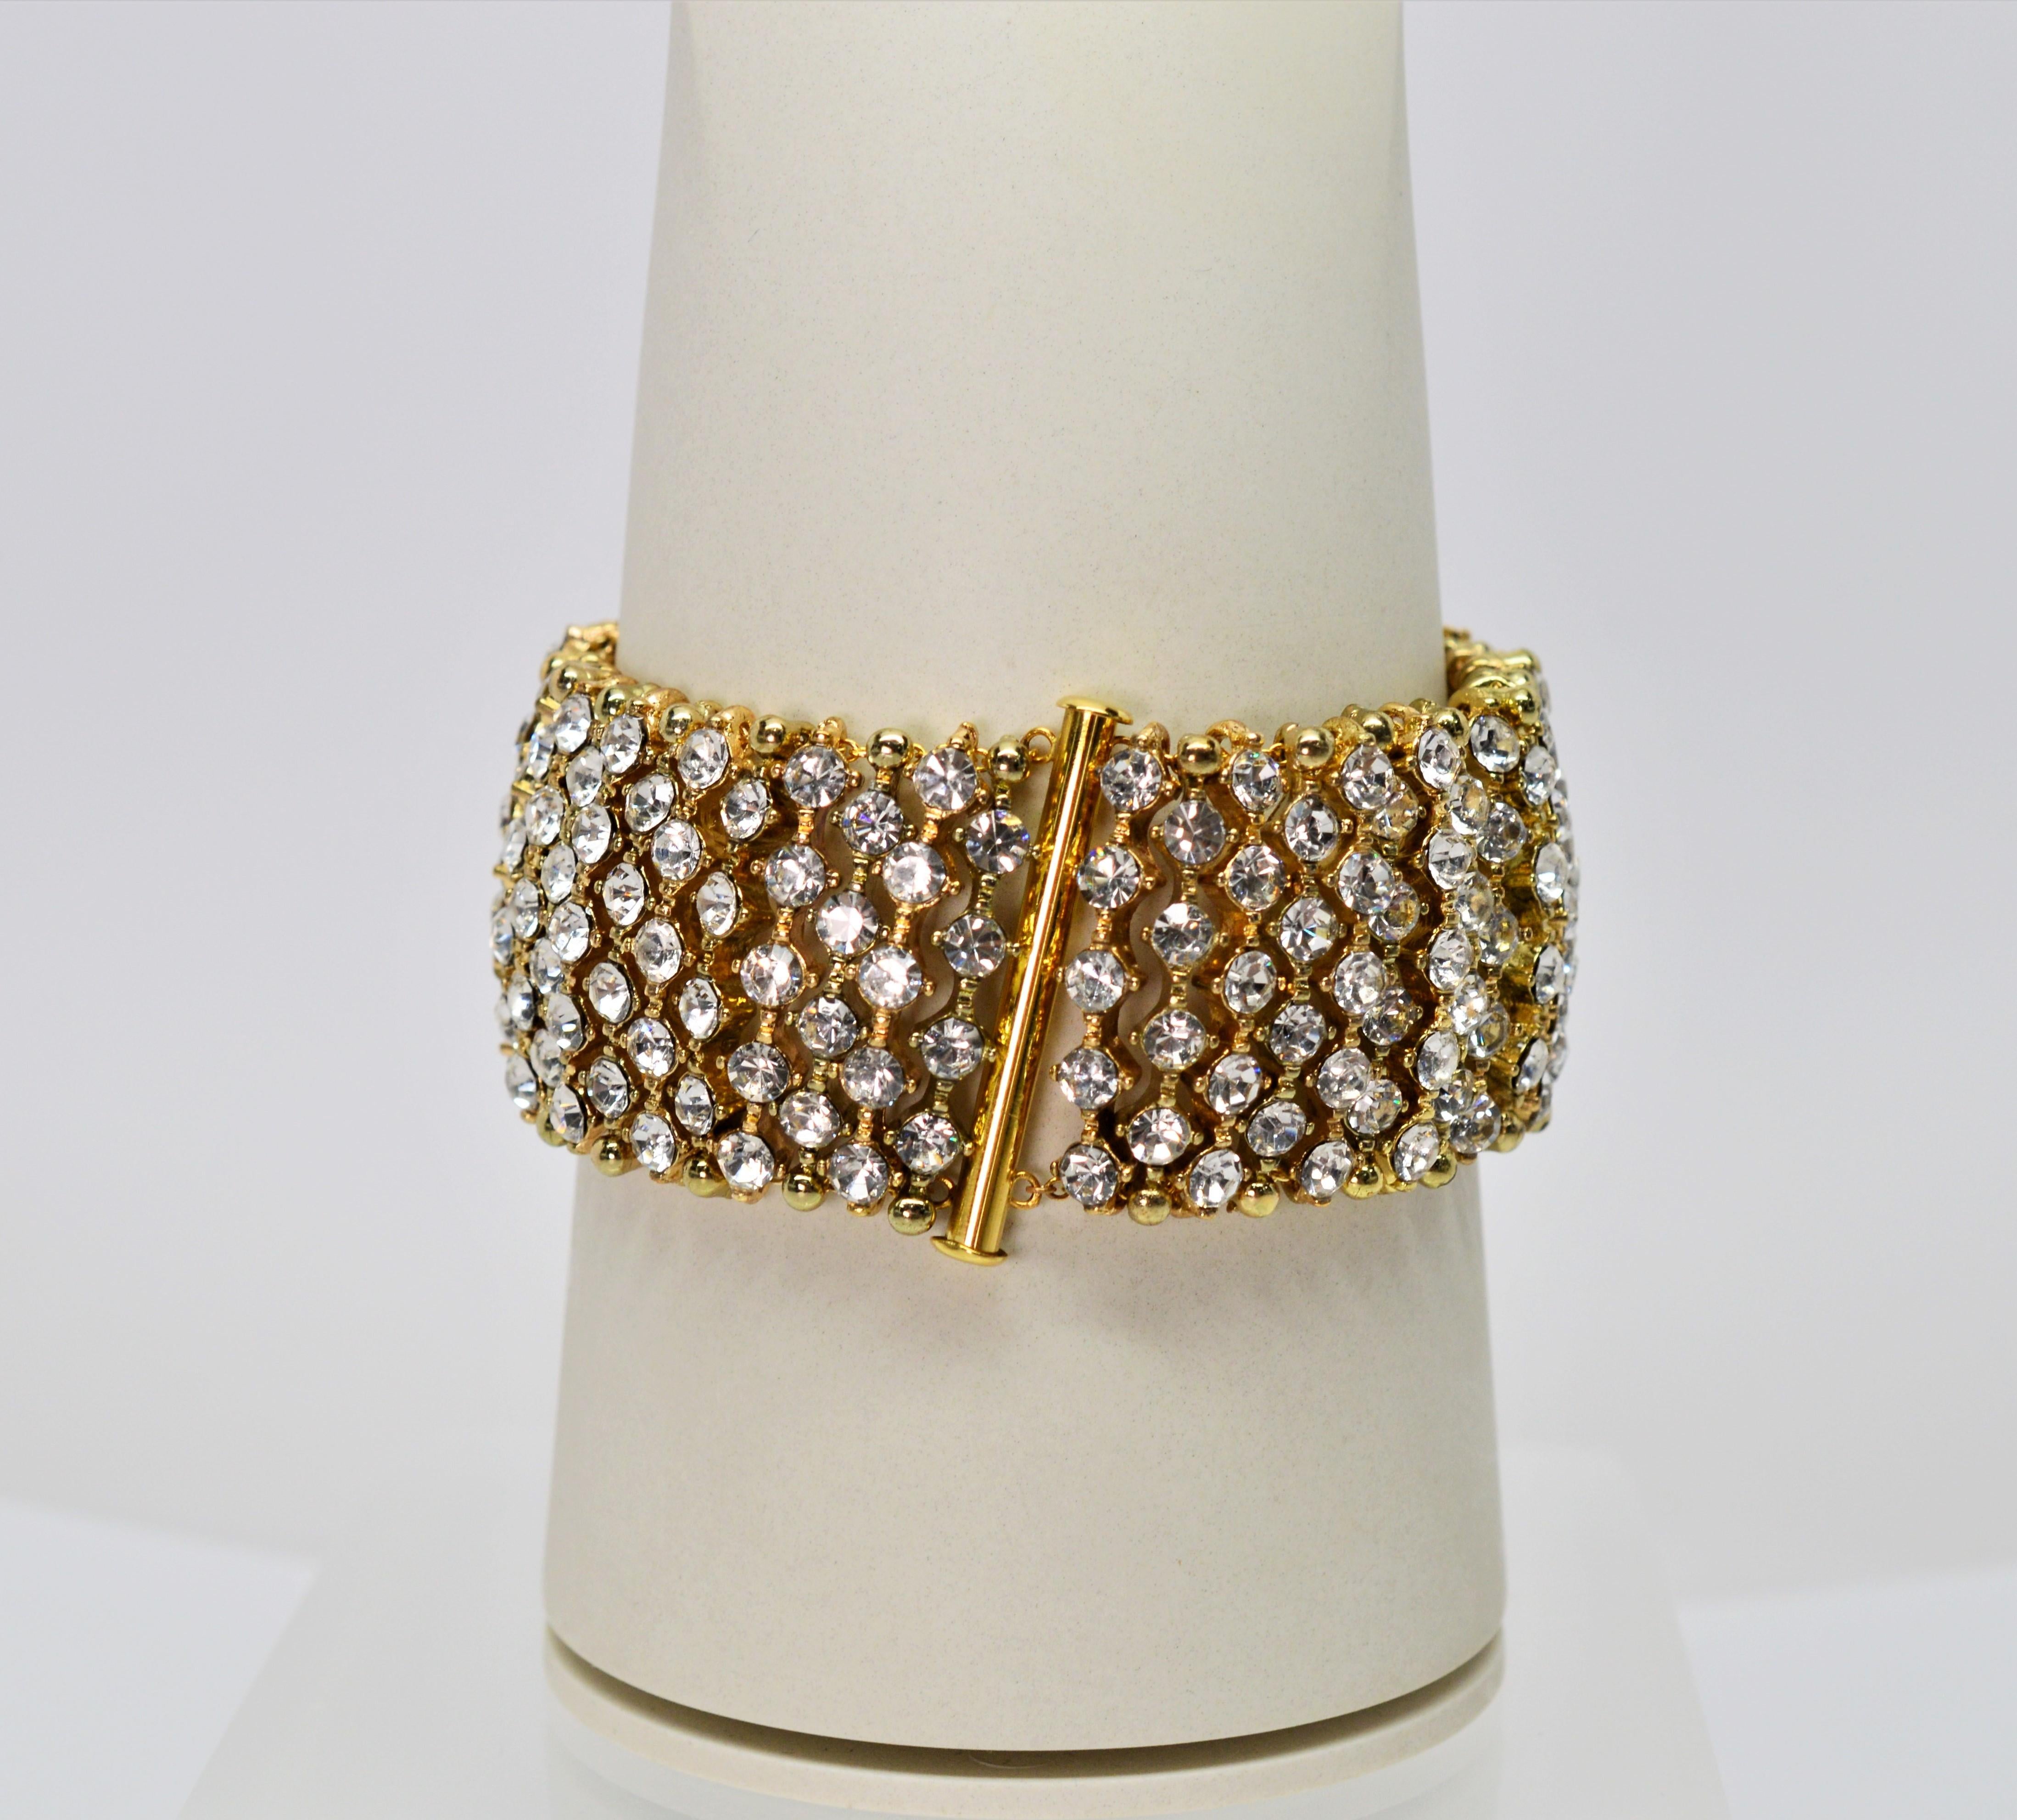 Rhinestone Crystal Costume Jeweled Link Bracelet In Excellent Condition For Sale In Mount Kisco, NY